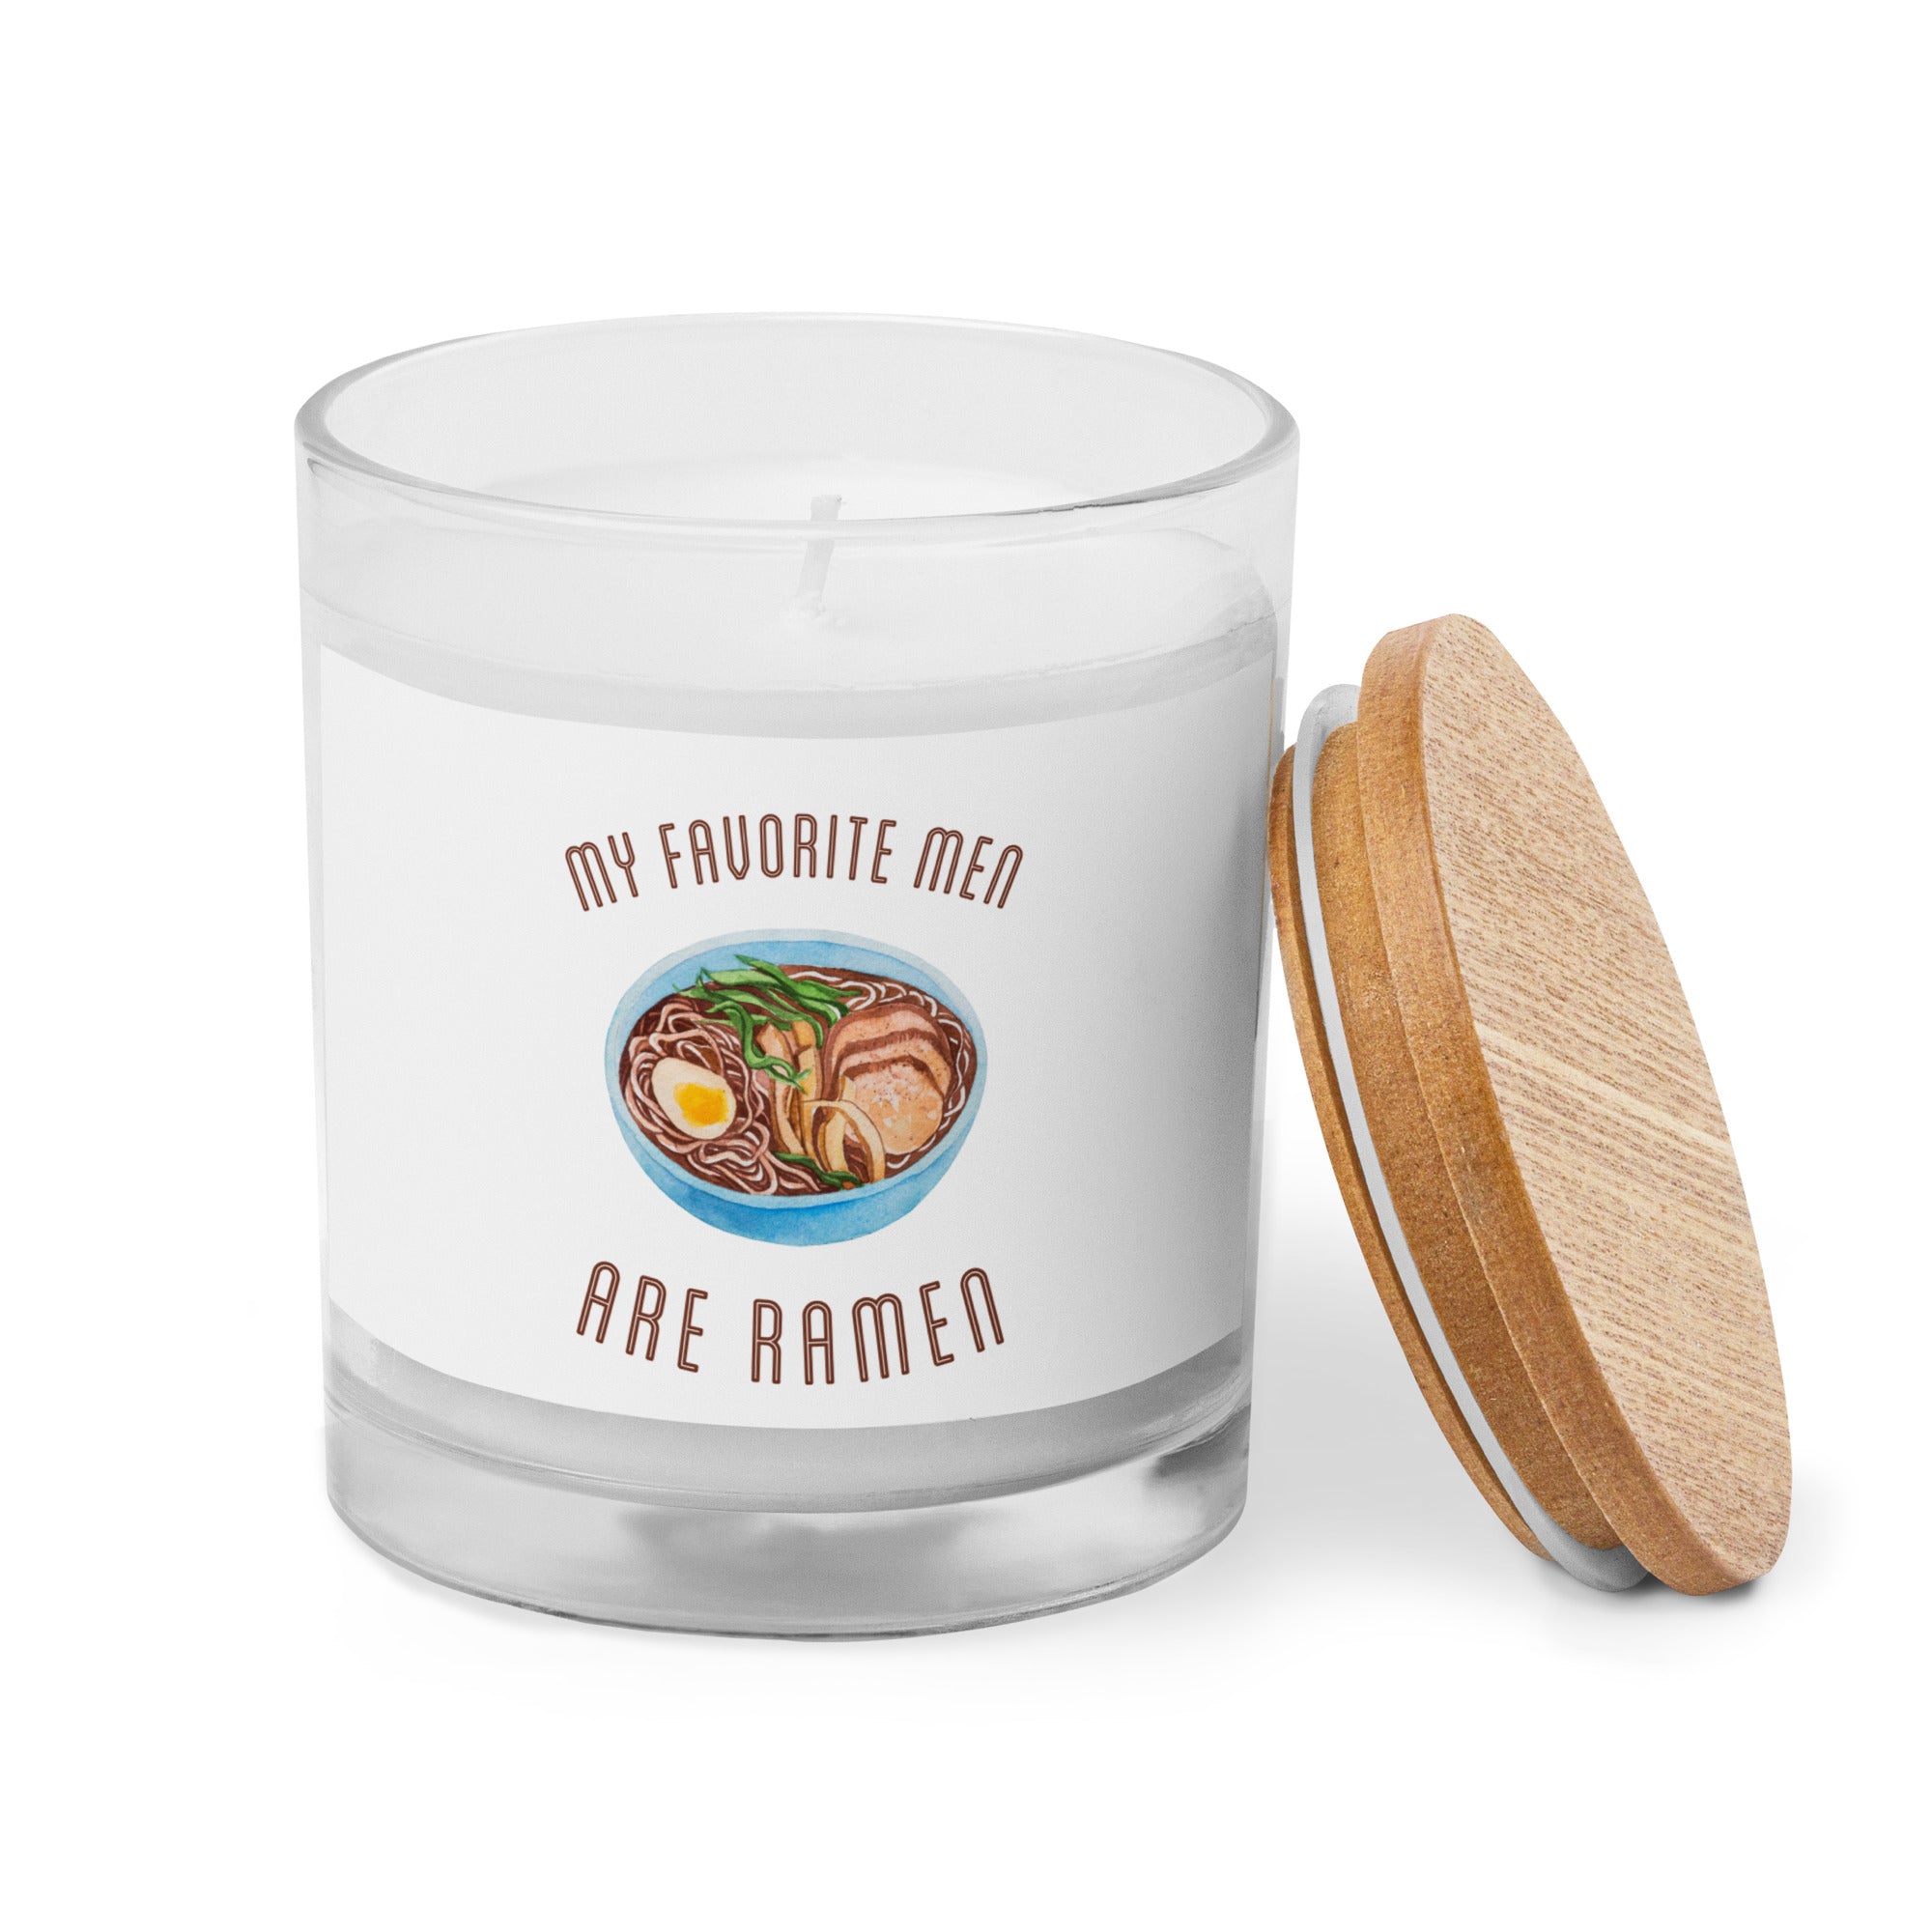 My favorite men are RAMEN funny gift Glass jar candle